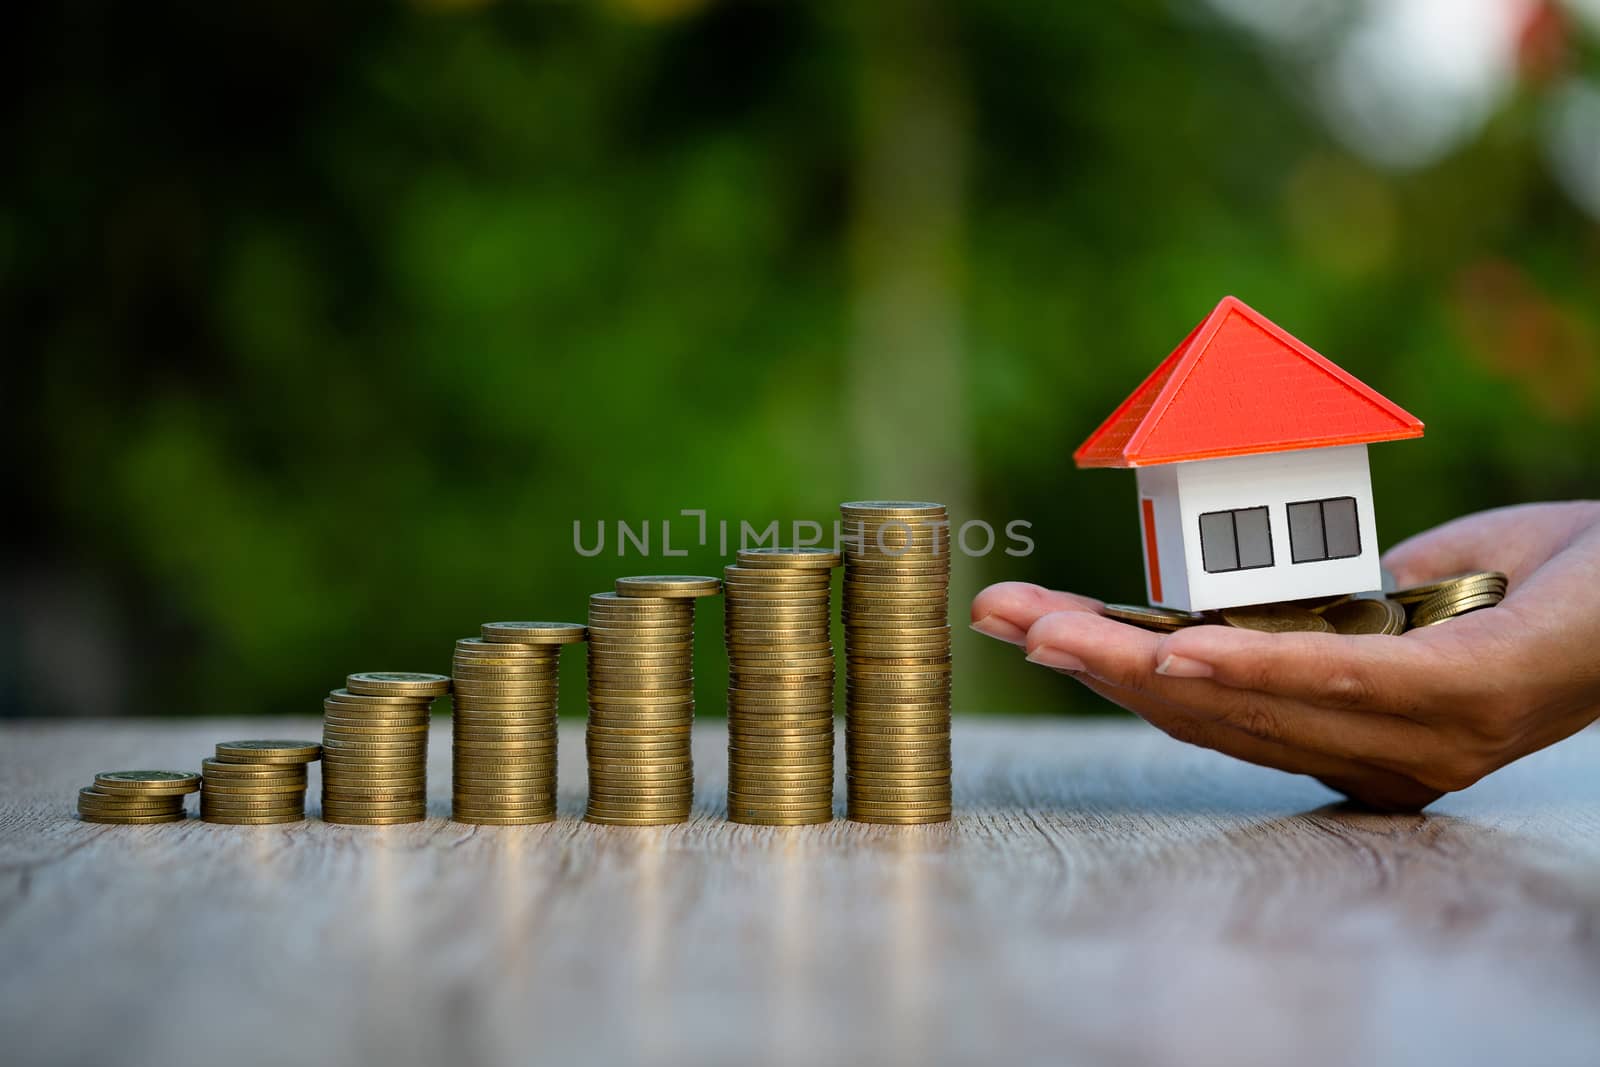 Orange roof house in investor's hand Placed close to the medallion, increasing the number of coins. Real estate investment concept, saving and buying houses, mortgage and bank loans.